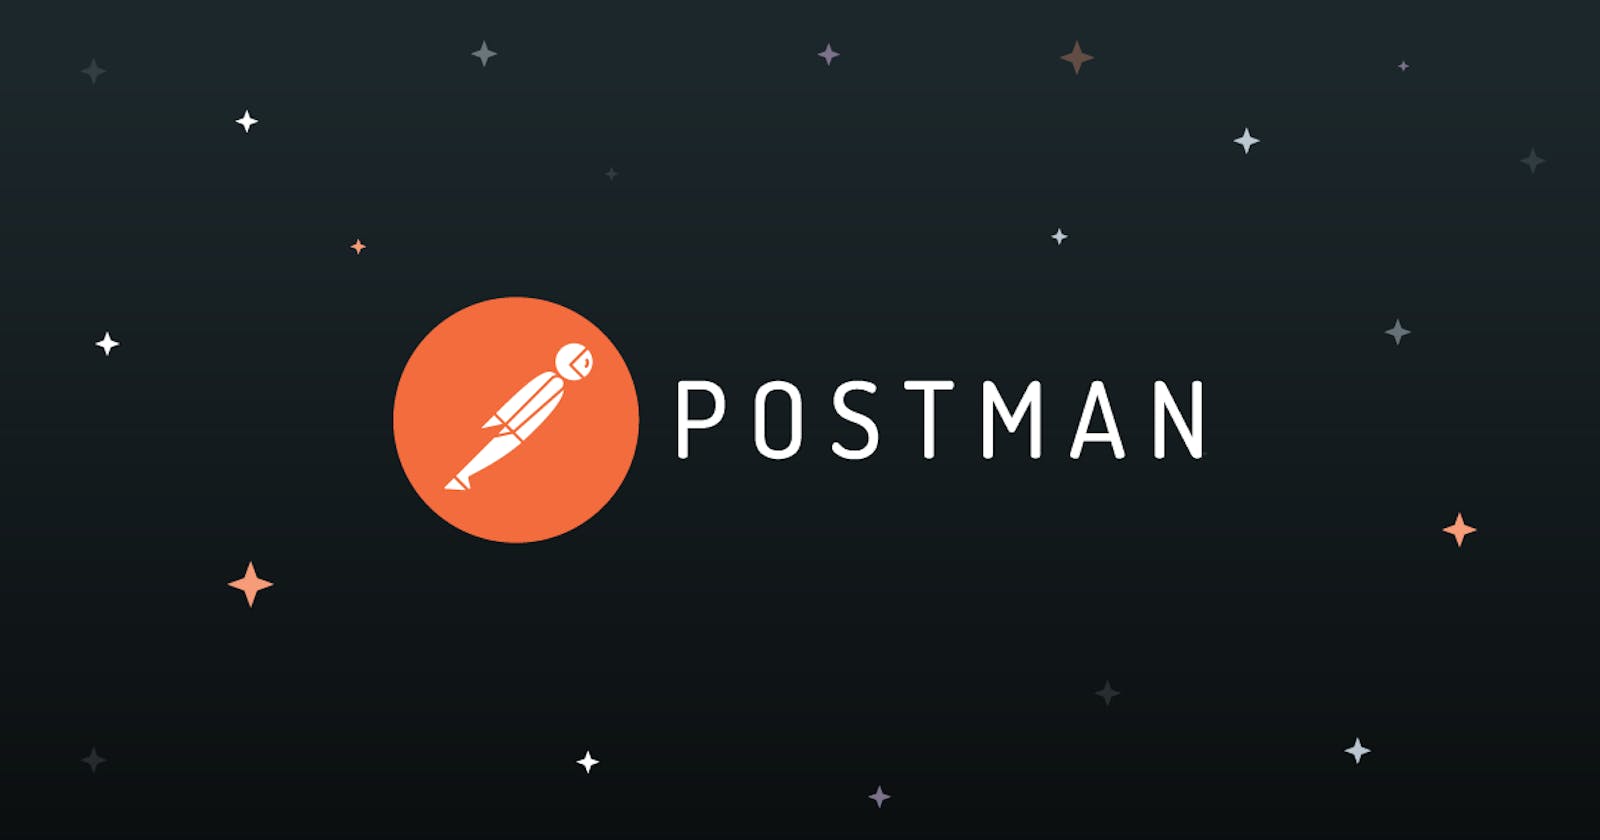 Getting started with Postman